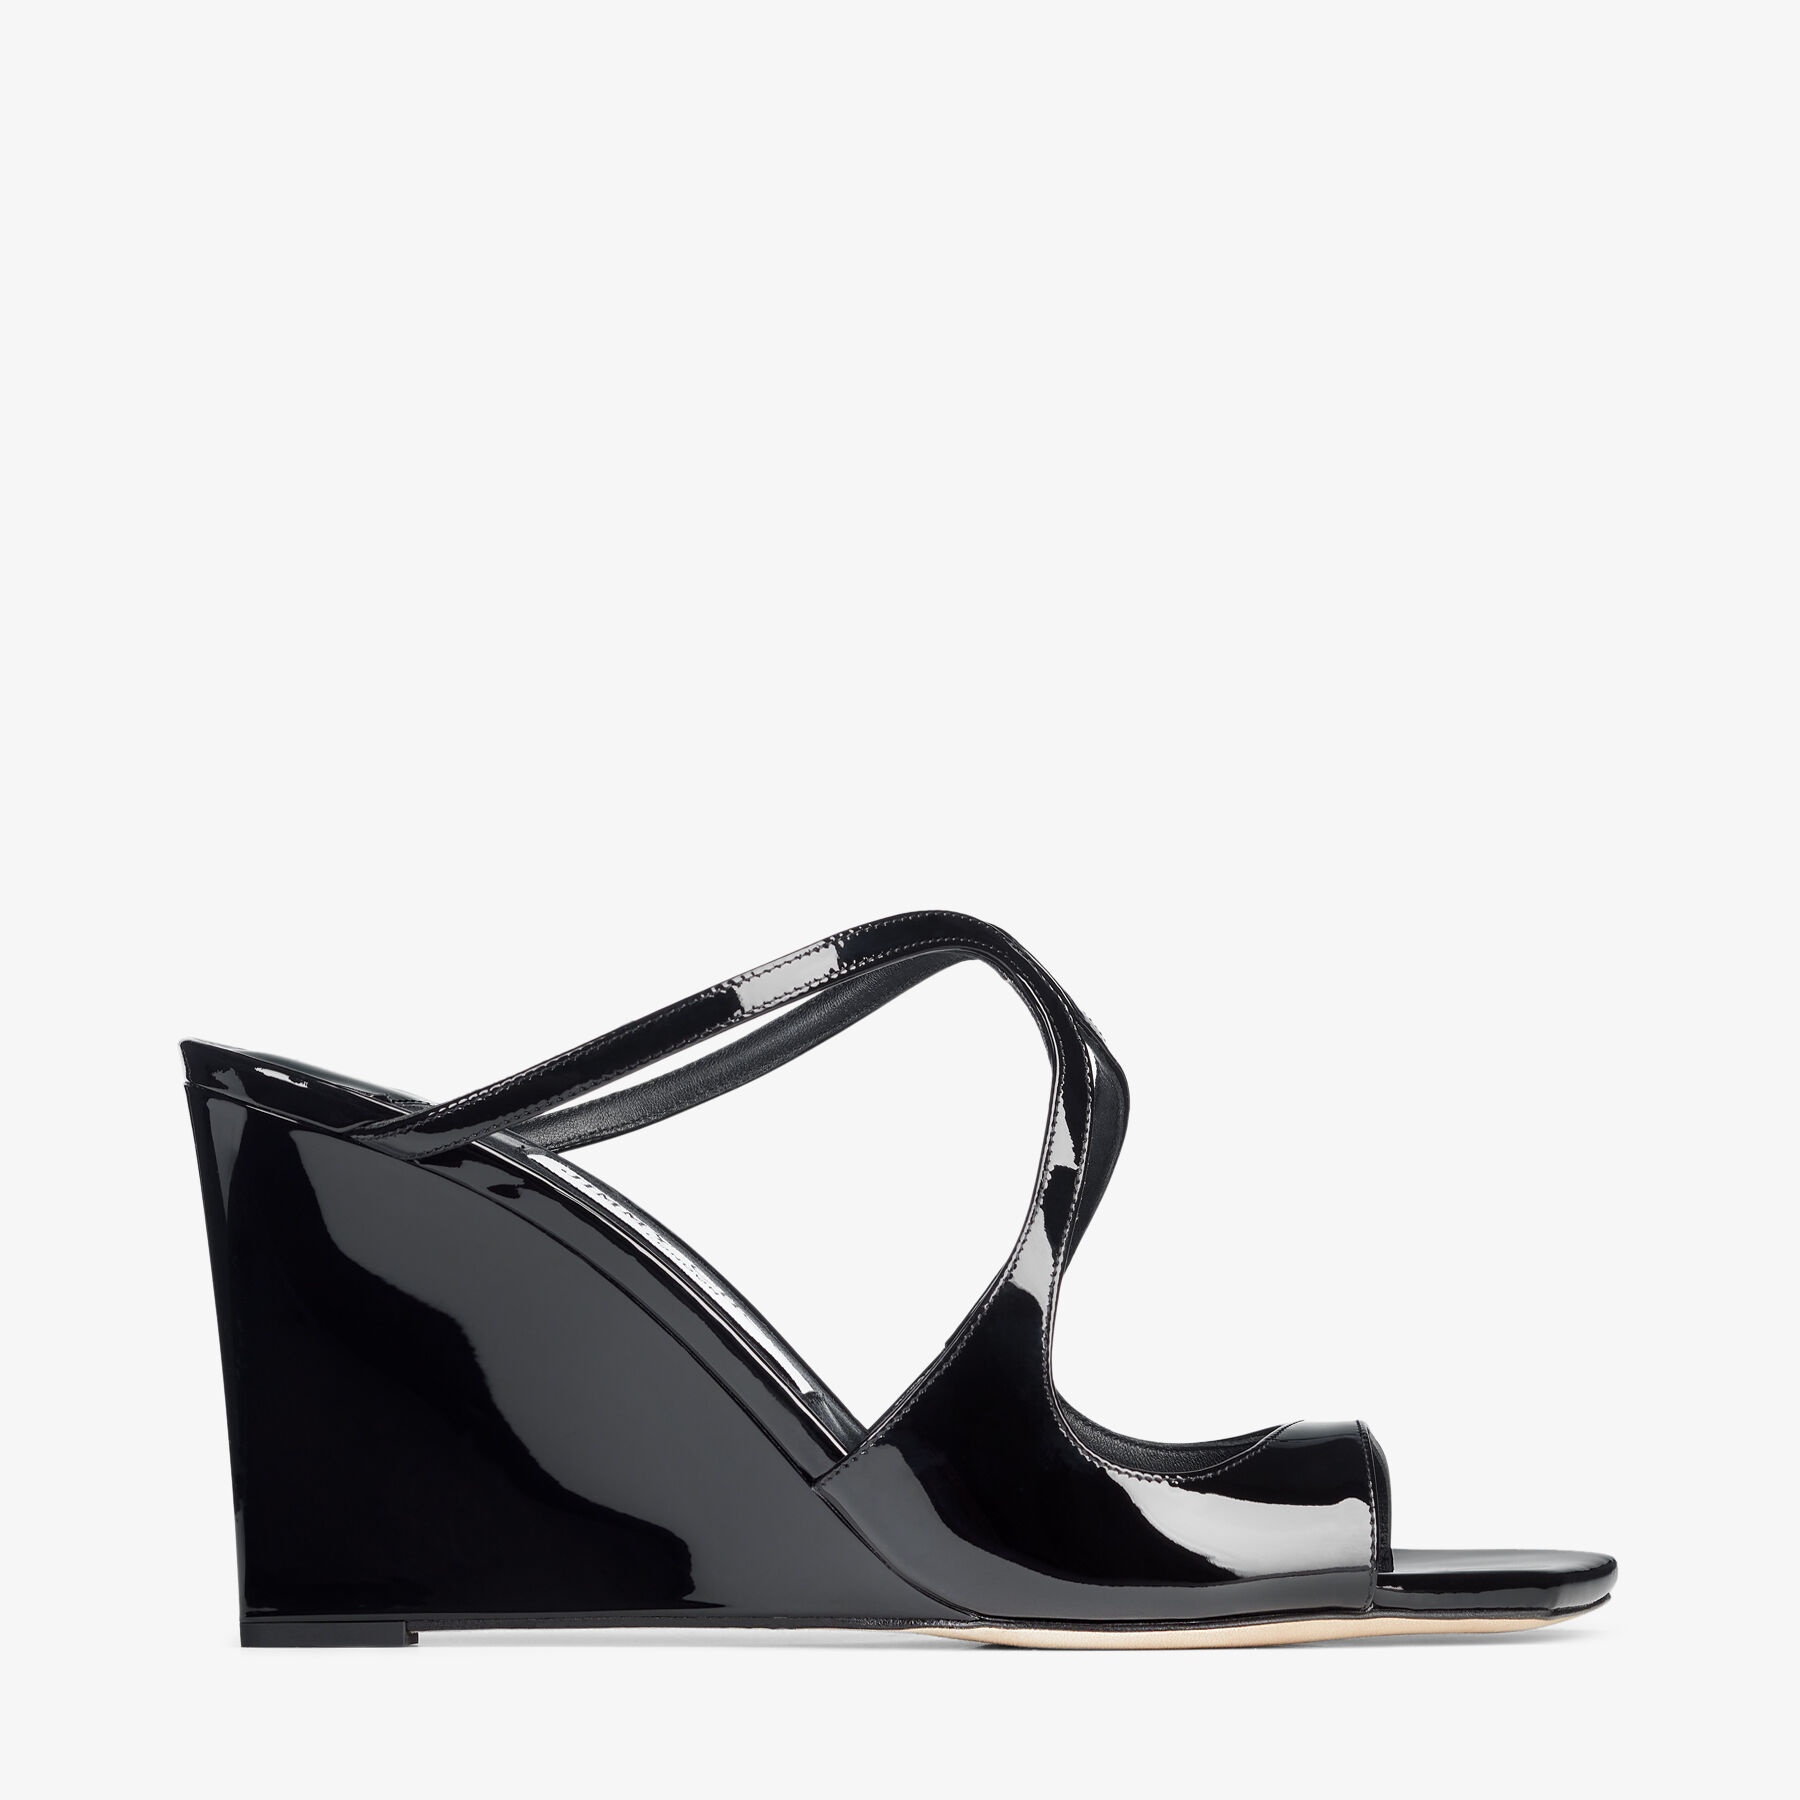 Anise Wedge 85
Black Patent Leather Wedge Mules - 1